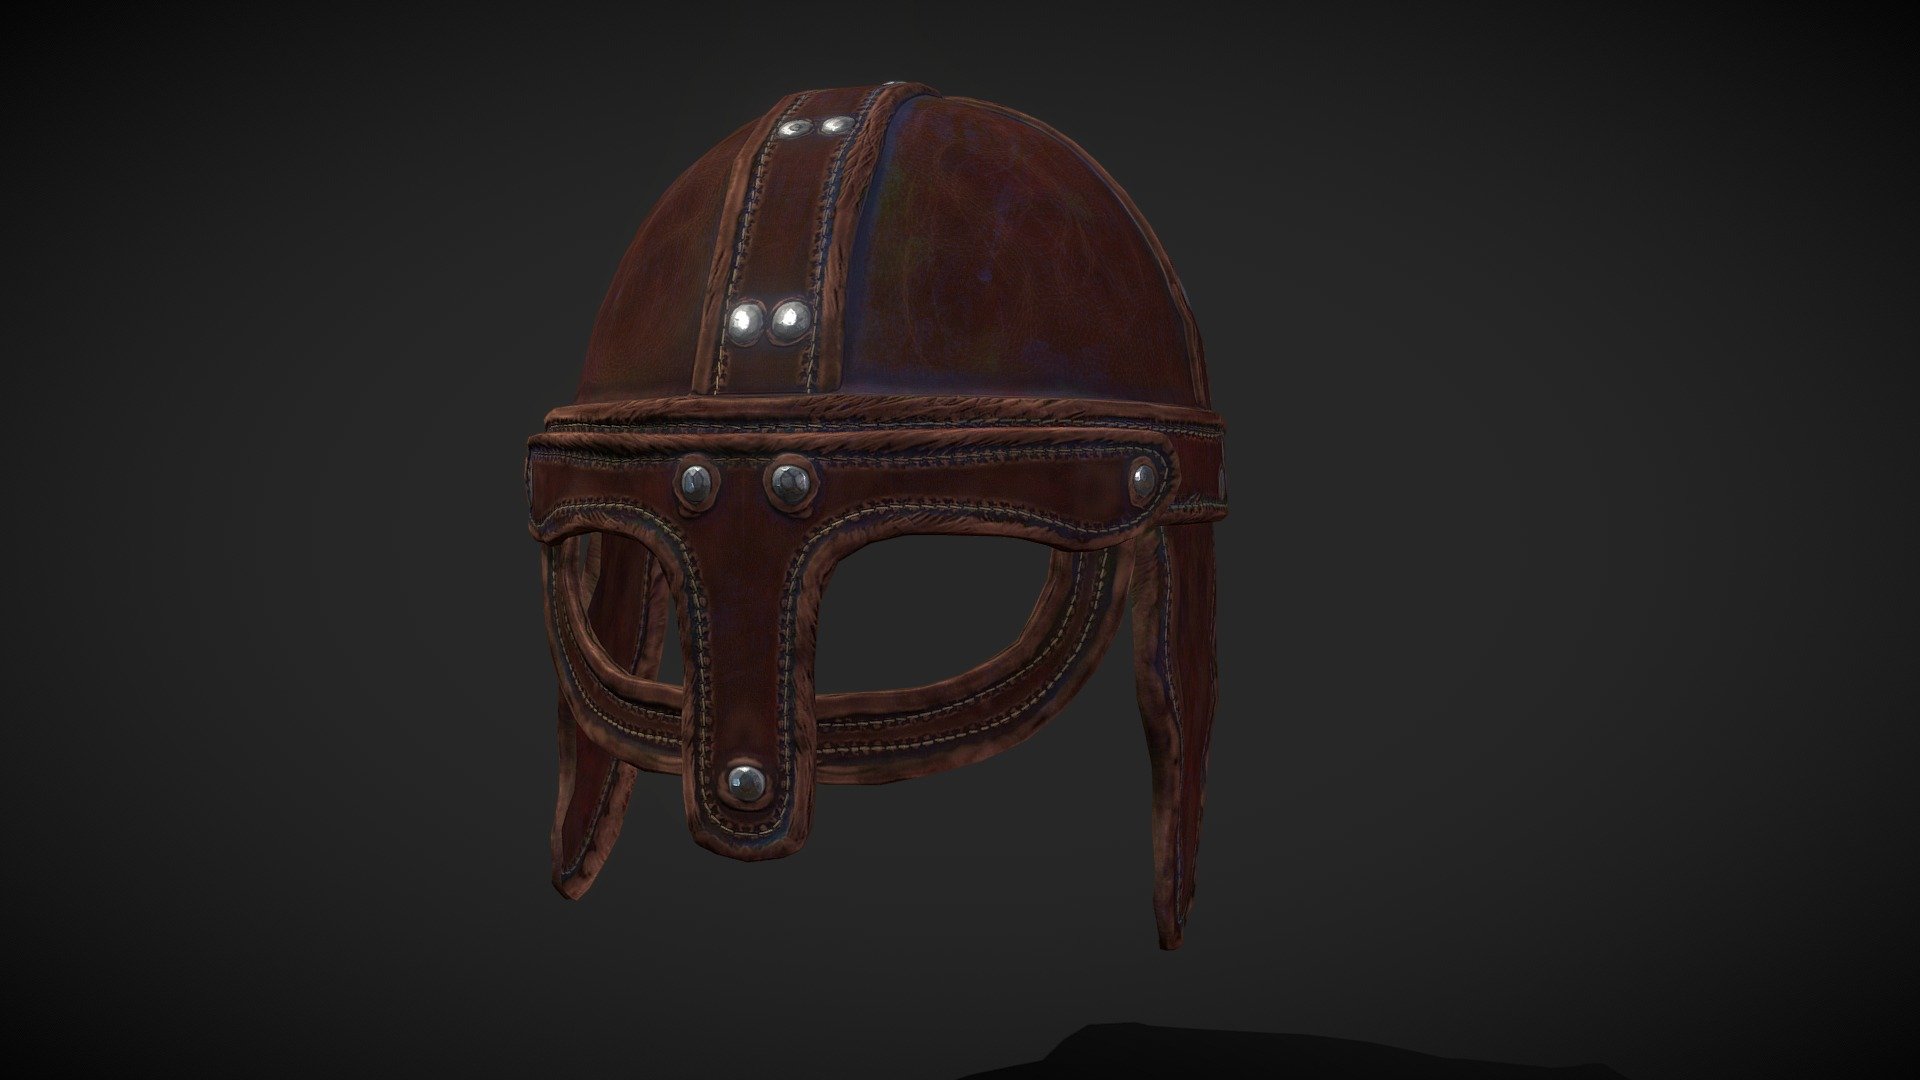 Made for Faes AR an #RPG #AR #Game #app a Thief Helmet with #zbrush #Maya #substancepainter and #marmoset if you want commission works for games, 3d print or argames I can do it 3d model